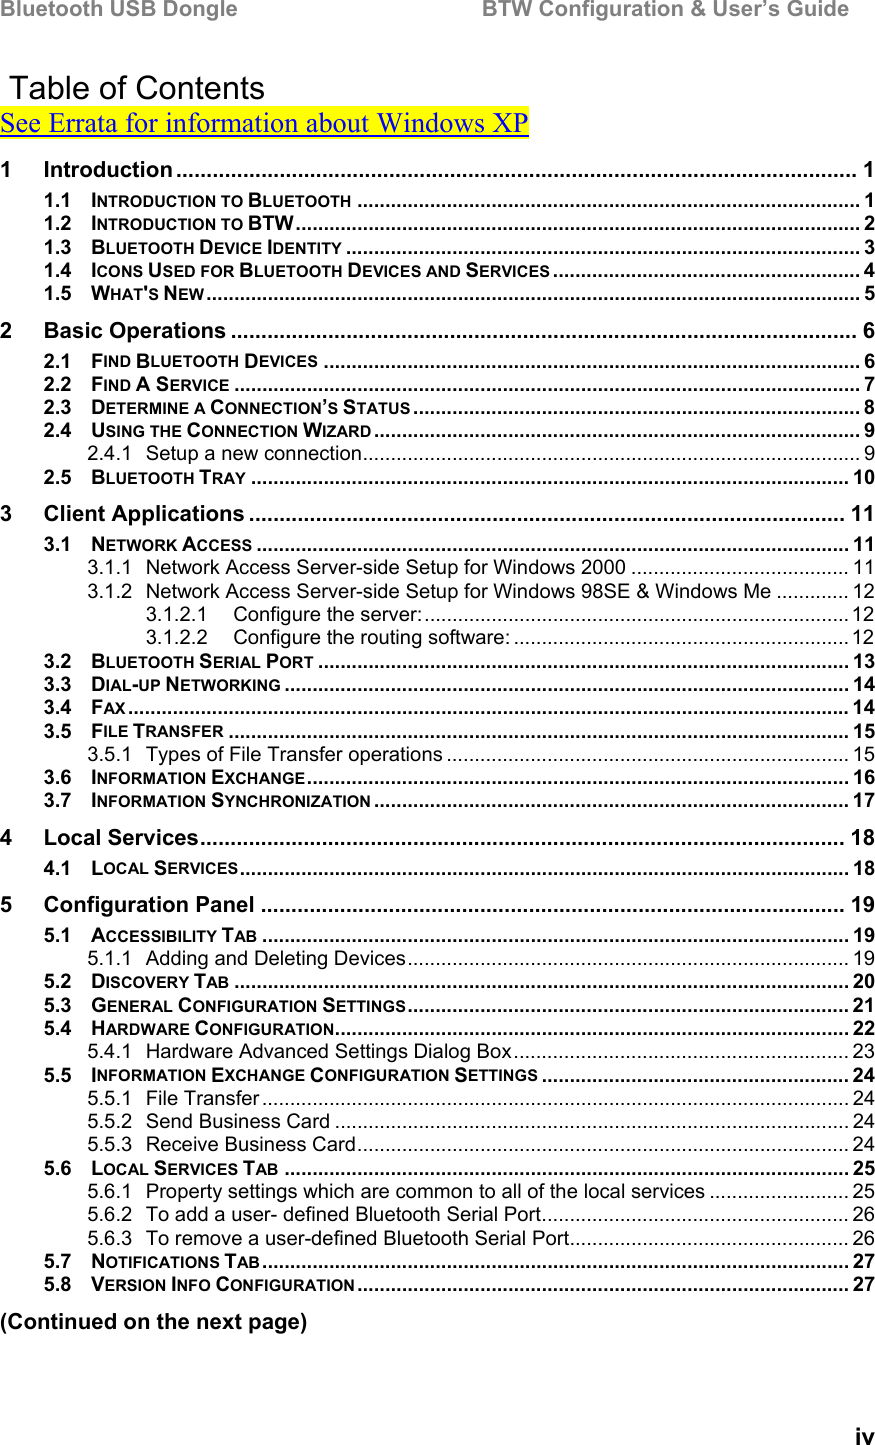 Bluetooth USB Dongle                                        BTW Configuration &amp; User’s Guide   iv  Table of Contents See Errata for information about Windows XP 1 Introduction ................................................................................................................ 1 1.1 INTRODUCTION TO BLUETOOTH .......................................................................................... 1 1.2 INTRODUCTION TO BTW..................................................................................................... 2 1.3 BLUETOOTH DEVICE IDENTITY ............................................................................................ 3 1.4 ICONS USED FOR BLUETOOTH DEVICES AND SERVICES ....................................................... 4 1.5 WHAT&apos;S NEW..................................................................................................................... 5 2 Basic Operations ....................................................................................................... 6 2.1 FIND BLUETOOTH DEVICES ................................................................................................ 6 2.2 FIND A SERVICE ................................................................................................................ 7 2.3 DETERMINE A CONNECTION’S STATUS ................................................................................ 8 2.4 USING THE CONNECTION WIZARD ....................................................................................... 9 2.4.1 Setup a new connection......................................................................................... 9 2.5 BLUETOOTH TRAY ........................................................................................................... 10 3 Client Applications .................................................................................................. 11 3.1 NETWORK ACCESS .......................................................................................................... 11 3.1.1 Network Access Server-side Setup for Windows 2000 ....................................... 11 3.1.2 Network Access Server-side Setup for Windows 98SE &amp; Windows Me ............. 12 3.1.2.1 Configure the server:............................................................................12 3.1.2.2 Configure the routing software: ............................................................ 12 3.2 BLUETOOTH SERIAL PORT ............................................................................................... 13 3.3 DIAL-UP NETWORKING ..................................................................................................... 14 3.4 FAX ................................................................................................................................. 14 3.5 FILE TRANSFER ............................................................................................................... 15 3.5.1 Types of File Transfer operations ........................................................................ 15 3.6 INFORMATION EXCHANGE................................................................................................. 16 3.7 INFORMATION SYNCHRONIZATION ..................................................................................... 17 4 Local Services.......................................................................................................... 18 4.1 LOCAL SERVICES............................................................................................................. 18 5 Configuration Panel ................................................................................................ 19 5.1 ACCESSIBILITY TAB ......................................................................................................... 19 5.1.1 Adding and Deleting Devices............................................................................... 19 5.2 DISCOVERY TAB .............................................................................................................. 20 5.3 GENERAL CONFIGURATION SETTINGS............................................................................... 21 5.4 HARDWARE CONFIGURATION............................................................................................ 22 5.4.1 Hardware Advanced Settings Dialog Box............................................................ 23 5.5 INFORMATION EXCHANGE CONFIGURATION SETTINGS ....................................................... 24 5.5.1 File Transfer ......................................................................................................... 24 5.5.2 Send Business Card ............................................................................................ 24 5.5.3 Receive Business Card........................................................................................ 24 5.6 LOCAL SERVICES TAB ..................................................................................................... 25 5.6.1 Property settings which are common to all of the local services ......................... 25 5.6.2 To add a user- defined Bluetooth Serial Port....................................................... 26 5.6.3 To remove a user-defined Bluetooth Serial Port.................................................. 26 5.7 NOTIFICATIONS TAB ......................................................................................................... 27 5.8 VERSION INFO CONFIGURATION ........................................................................................ 27 (Continued on the next page) 